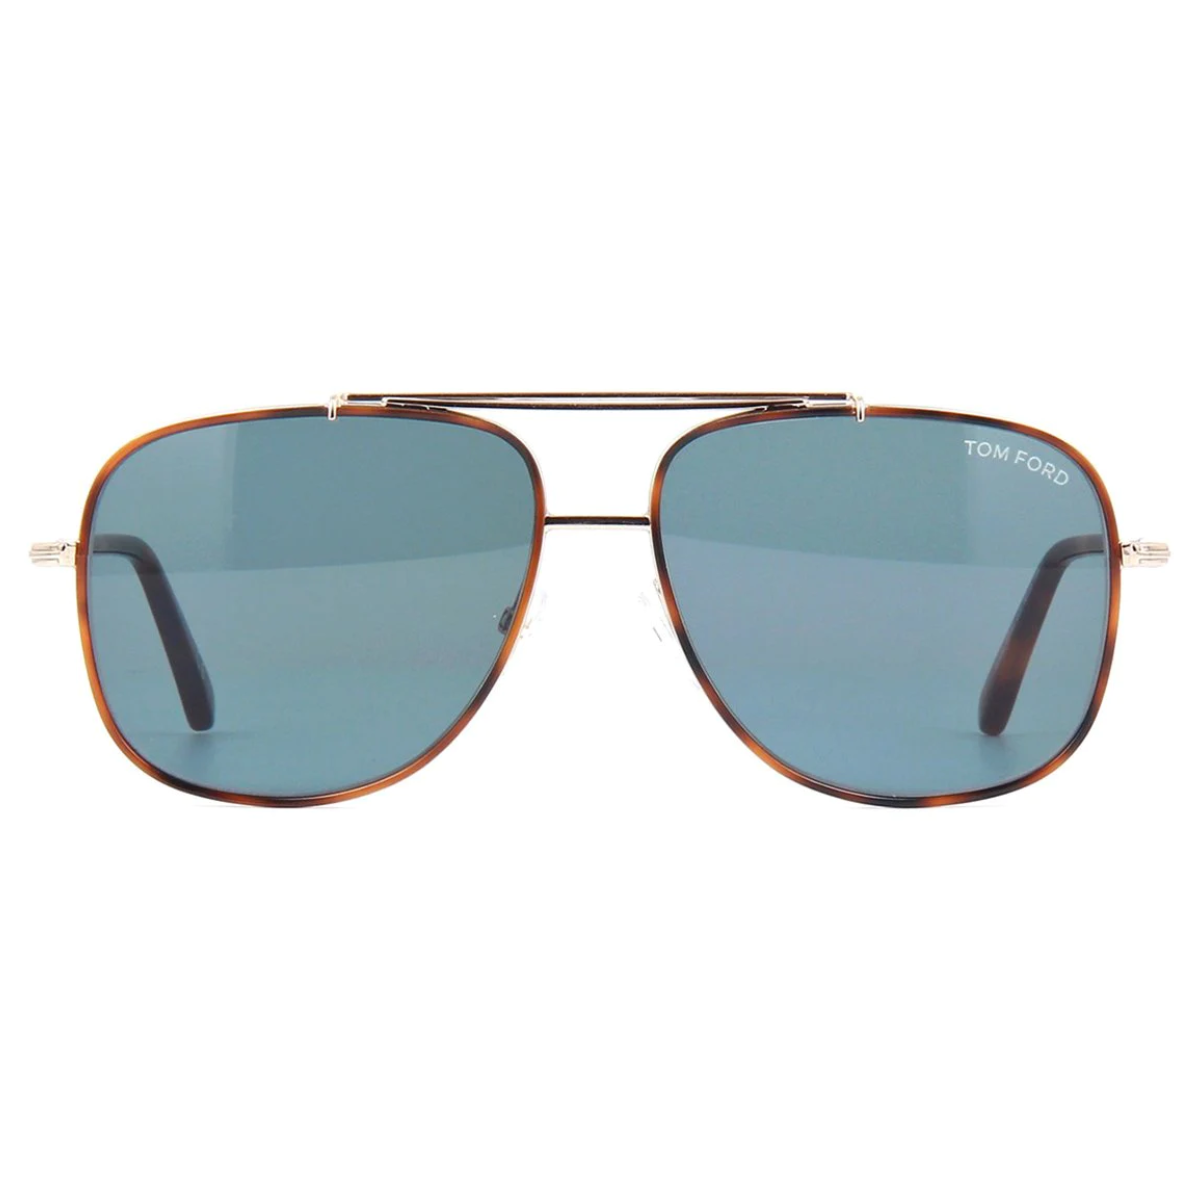 "Tom Ford 693 aviator sunglasses displayed, featuring sleek metal frames with gold and Havana accents and light green polycarbonate lenses, embodying luxury and style."